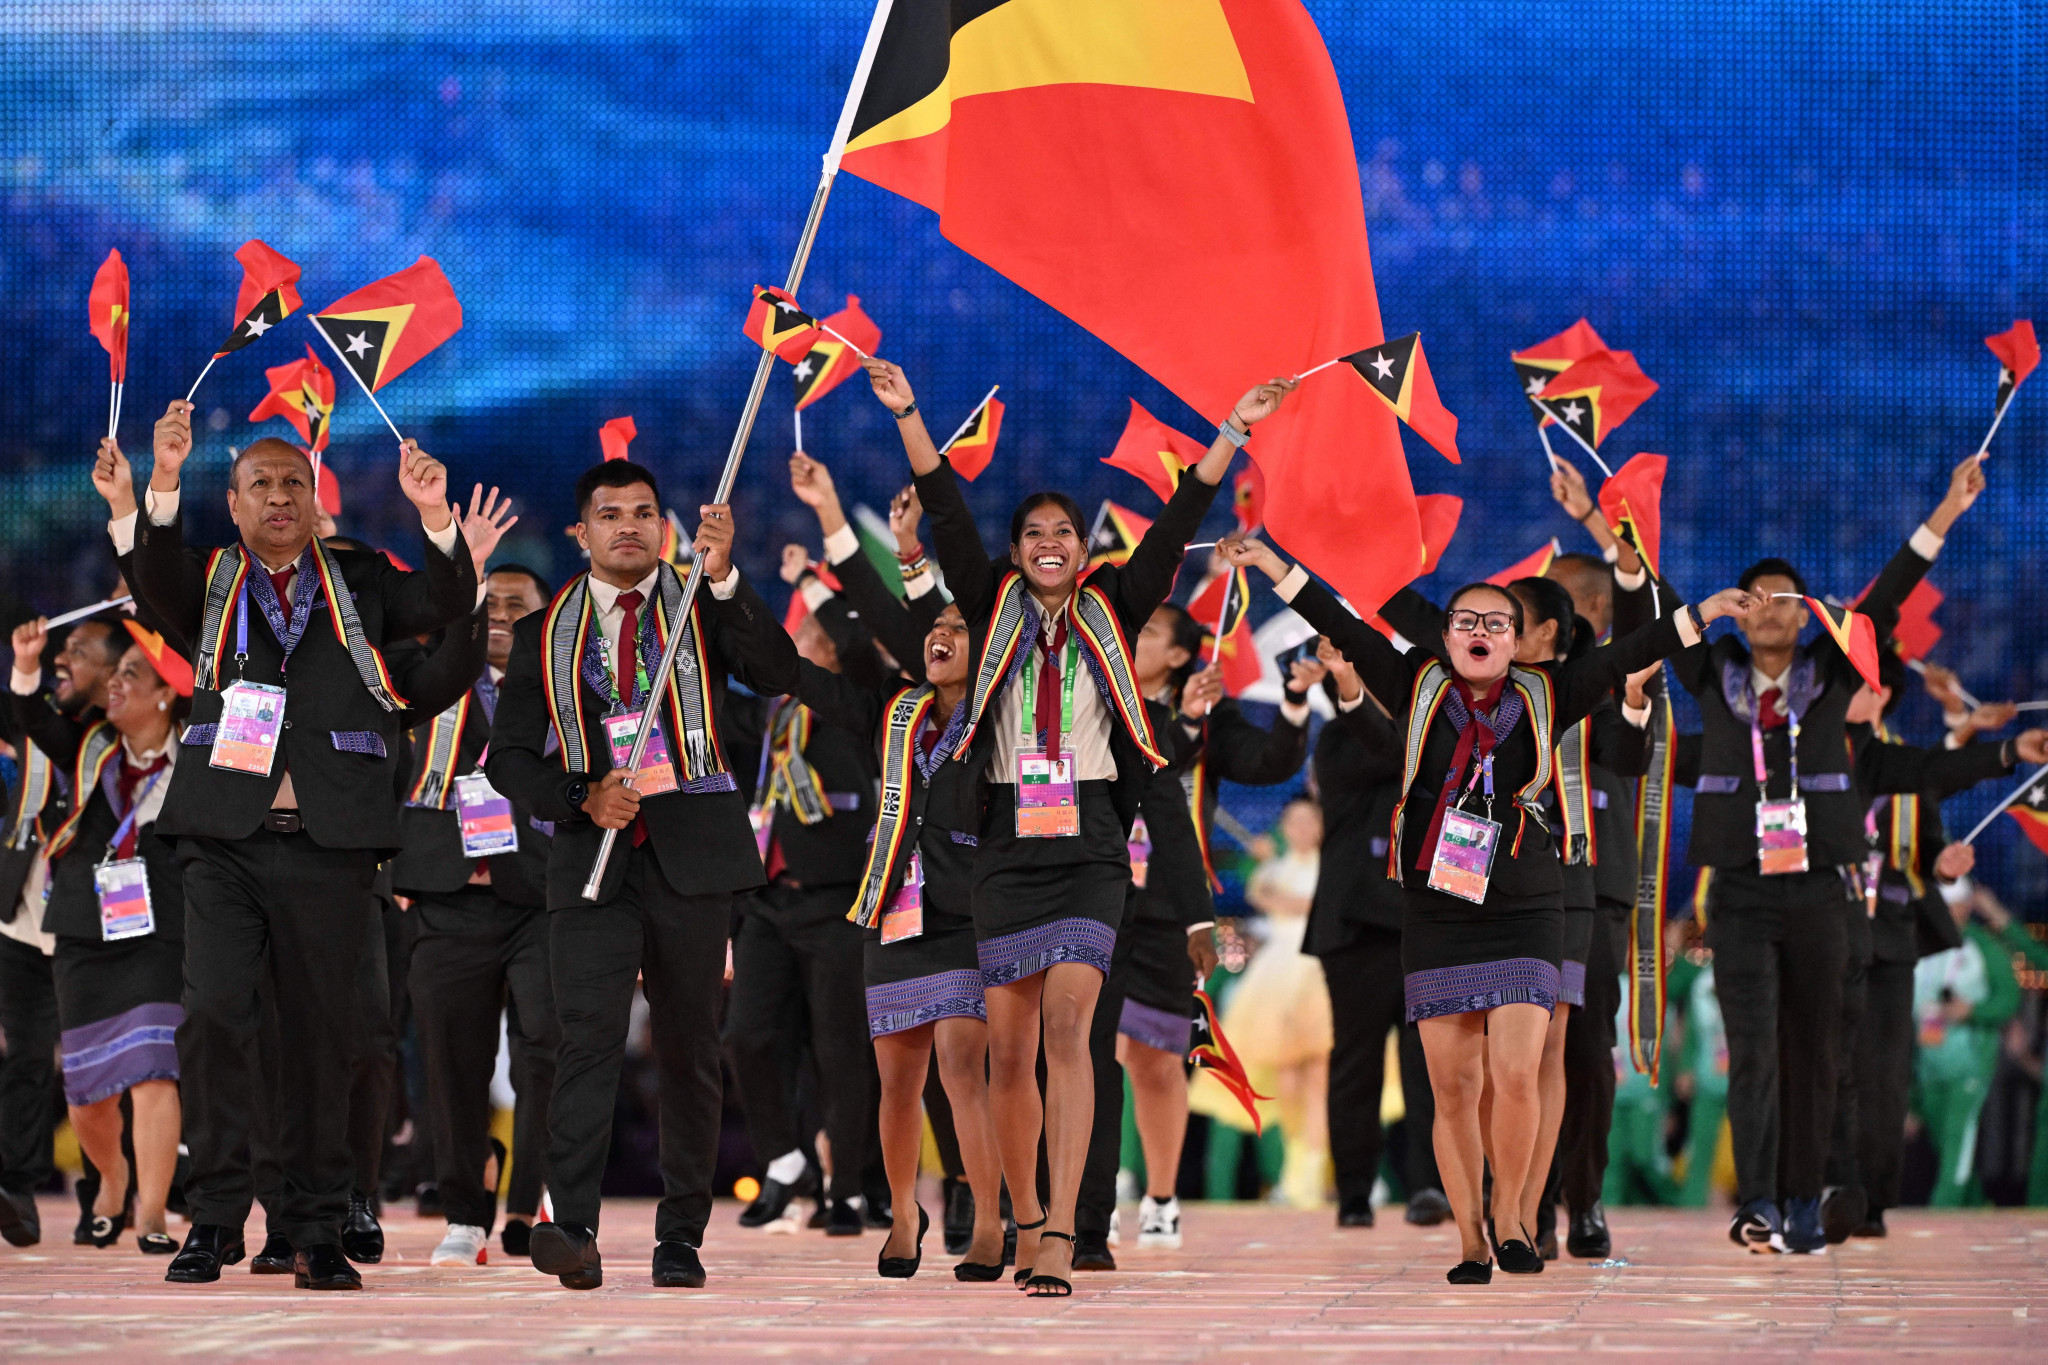 José Garcia is part of a Timor Leste team competing at Hangzhou 2022 hoping to use the Asian Games to boost its chances of competing in five sports at next year's Olympics in Paris ©Getty Images